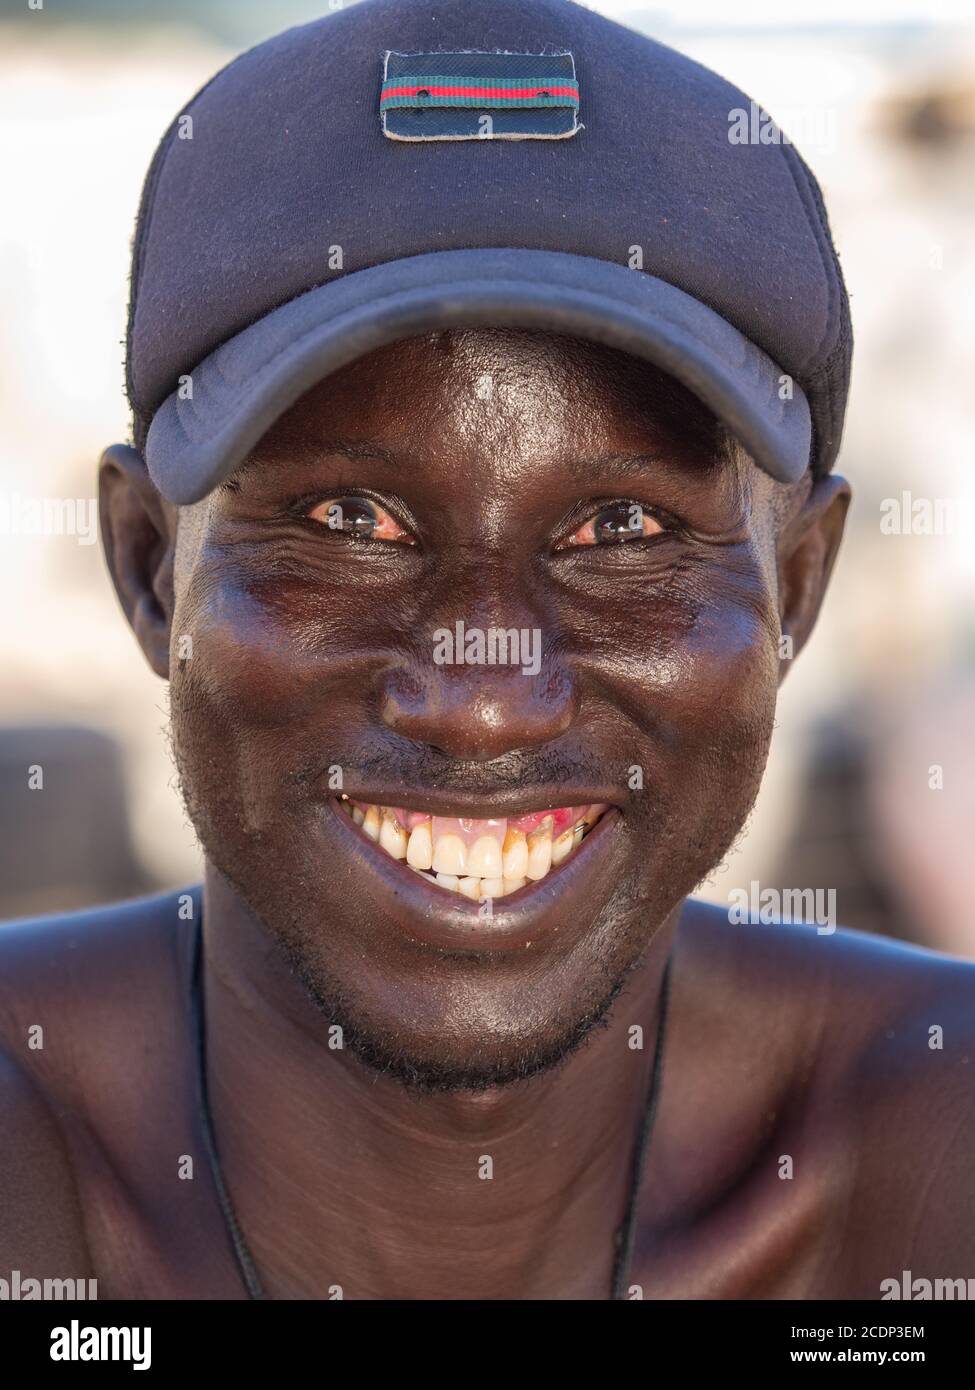 Senegal, Africa - January 24, 2019: Portrait of a happy black man from  Senegal Stock Photo - Alamy